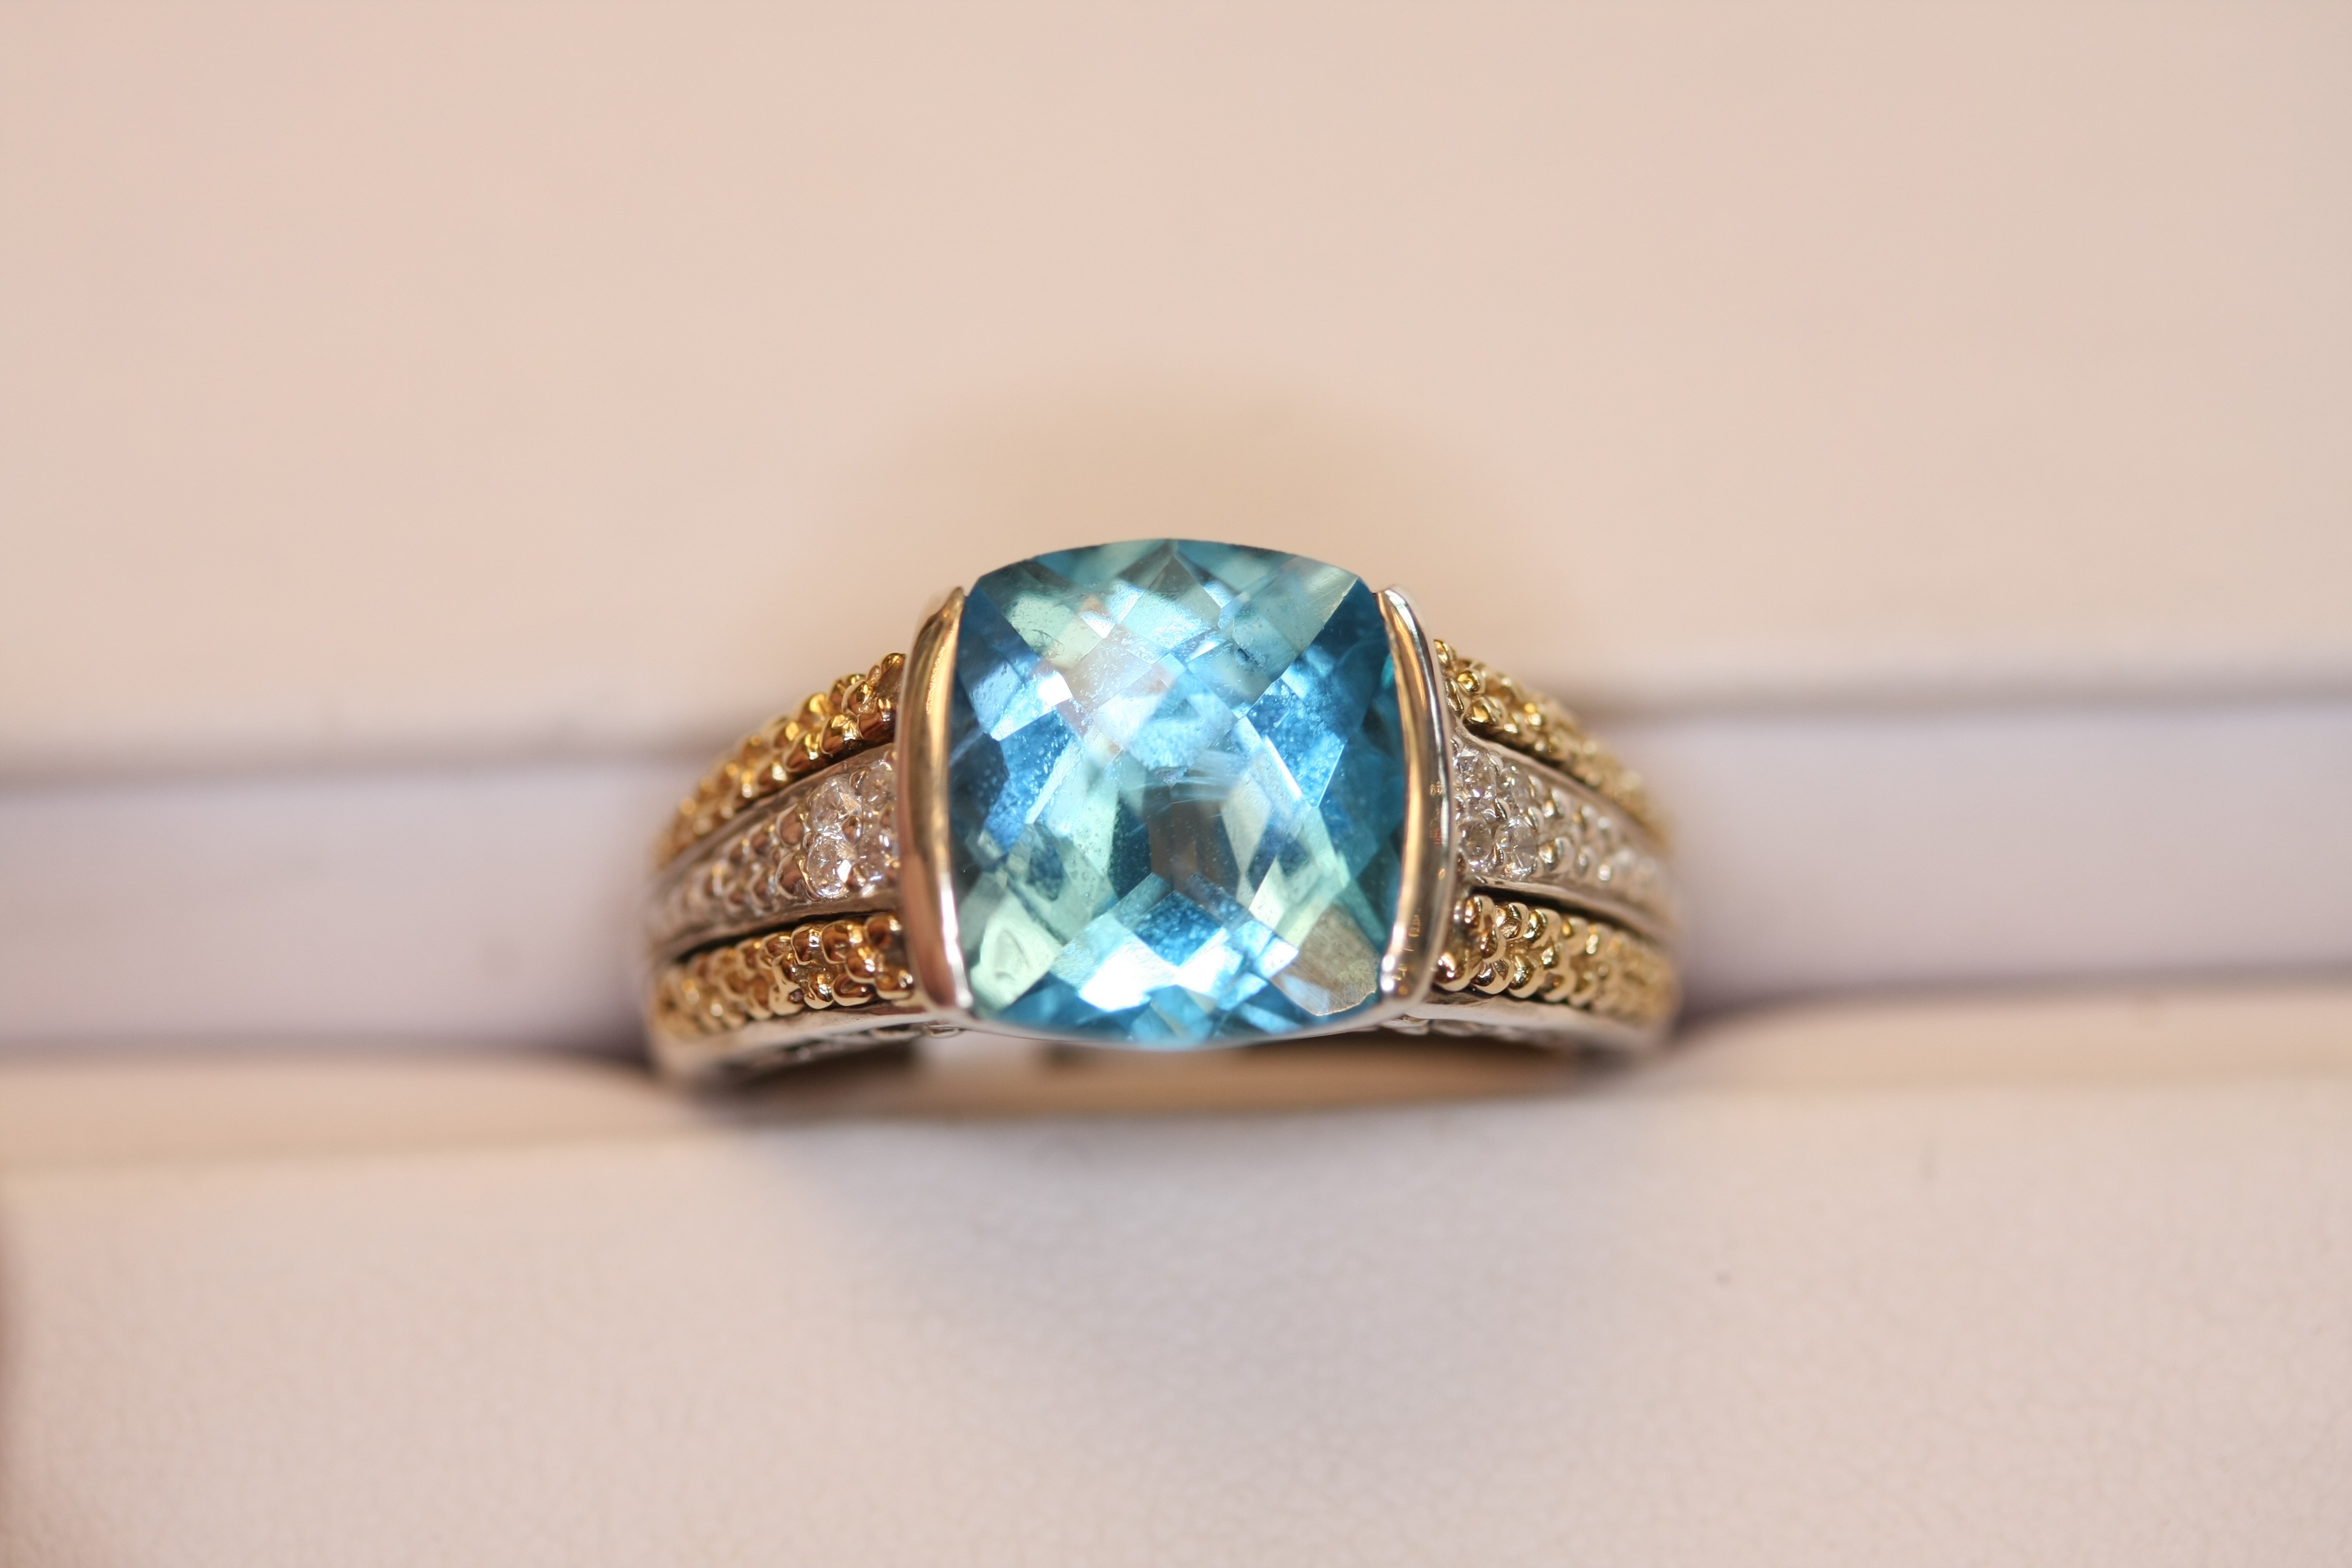 Signature Blue topaz Silver and Gold Ring